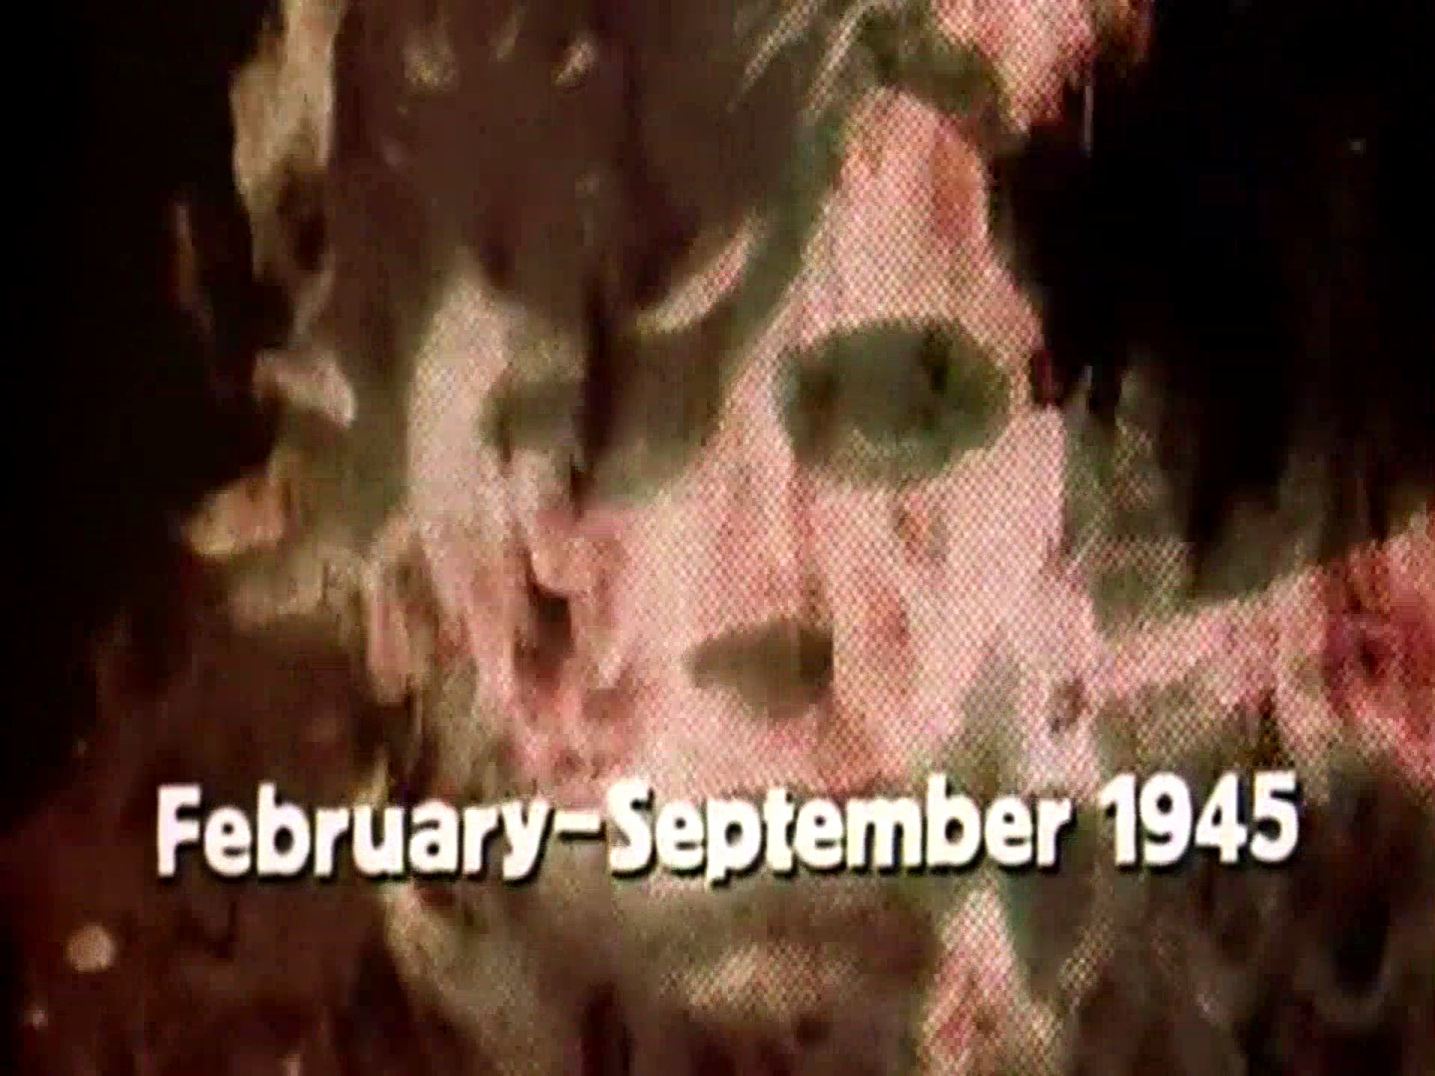 Main title from the 1974 ‘The Bomb’ episode of The World at War (1973-1974) (2). February-September 1945